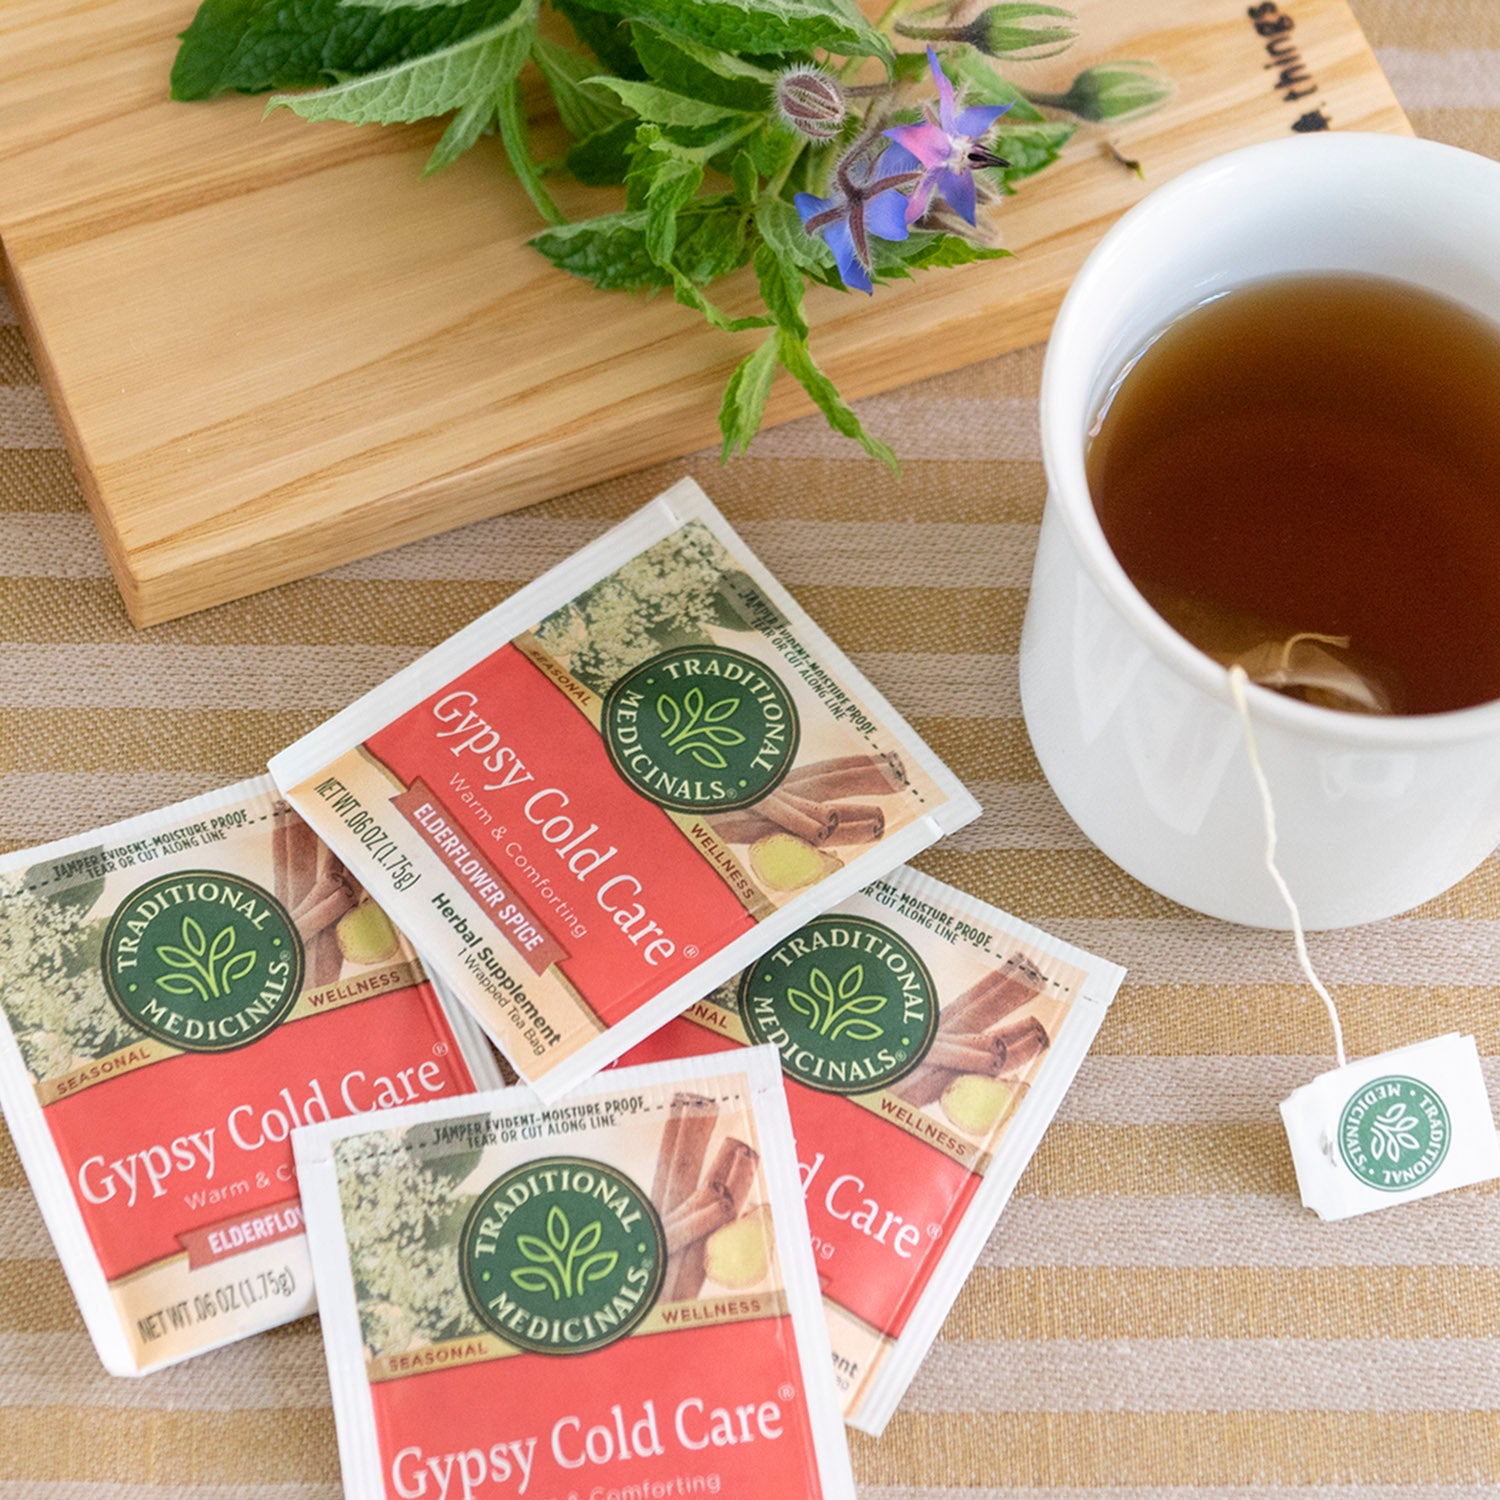 Organic Herbal Cold Care